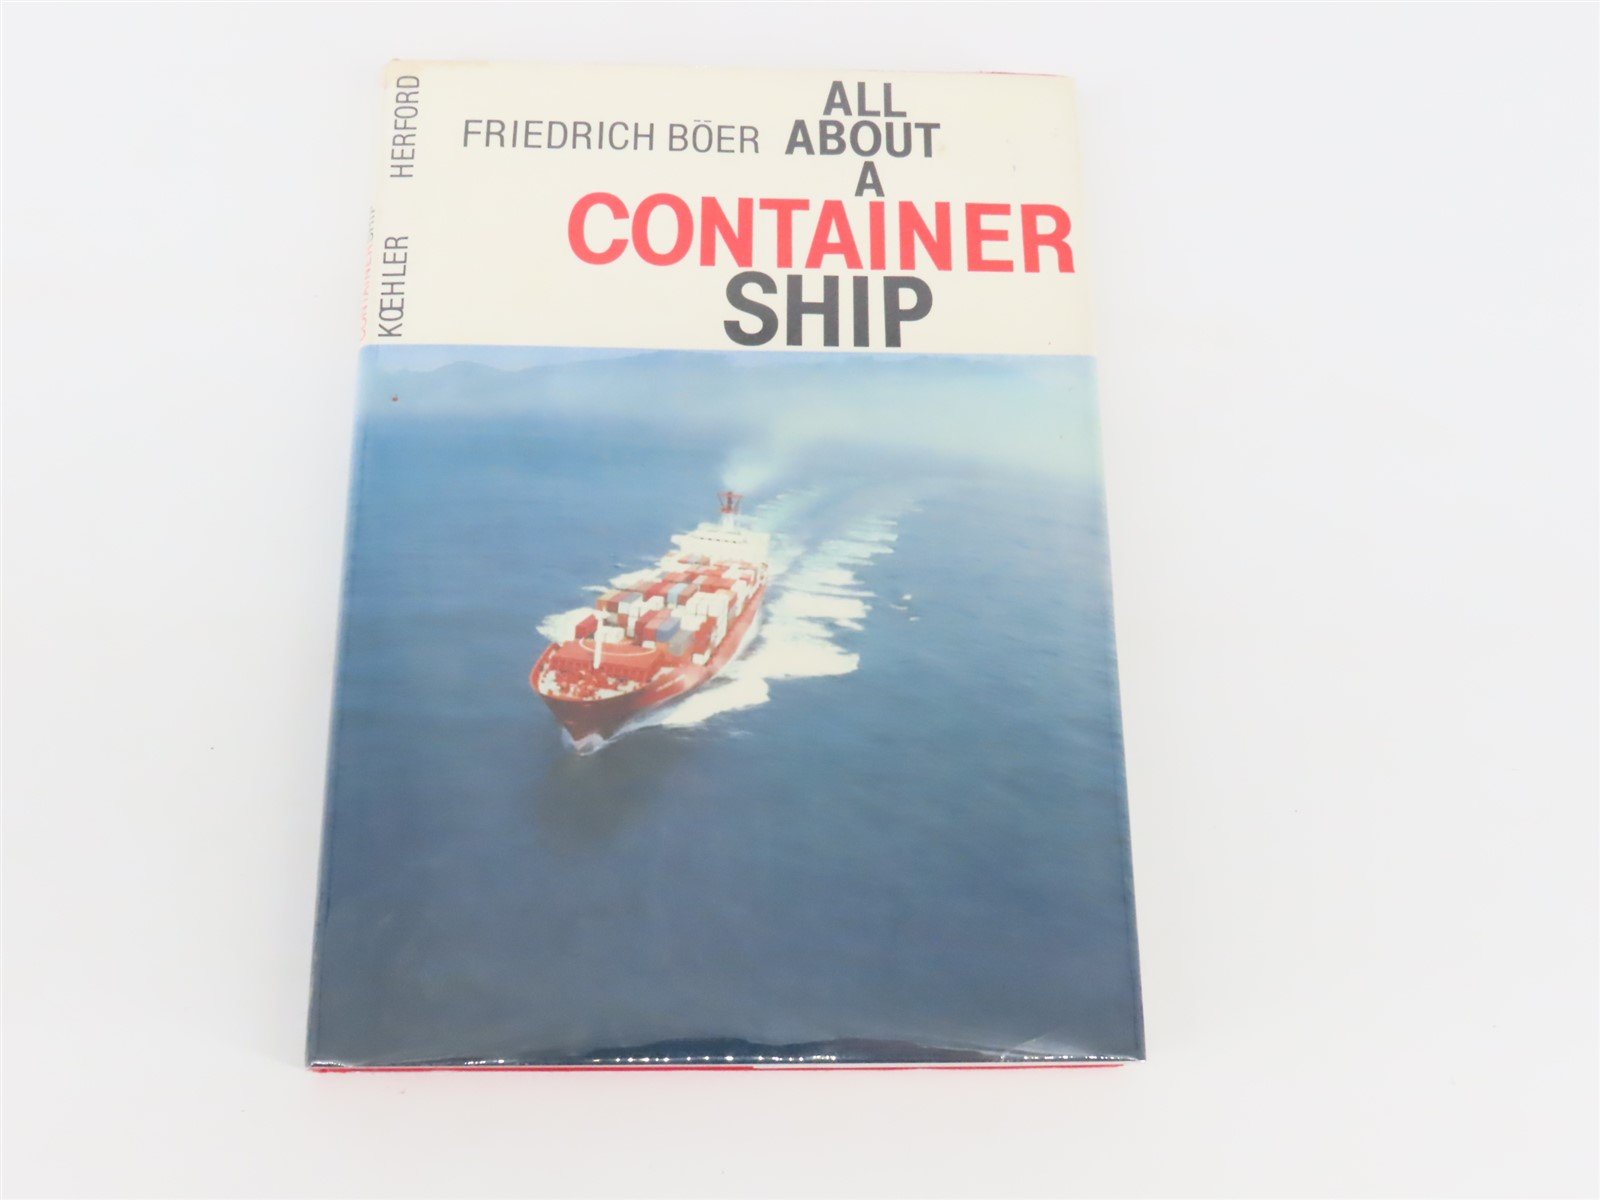 All About A Container Ship Koehler Herford by Friedrich Boer ©1985 HC Book